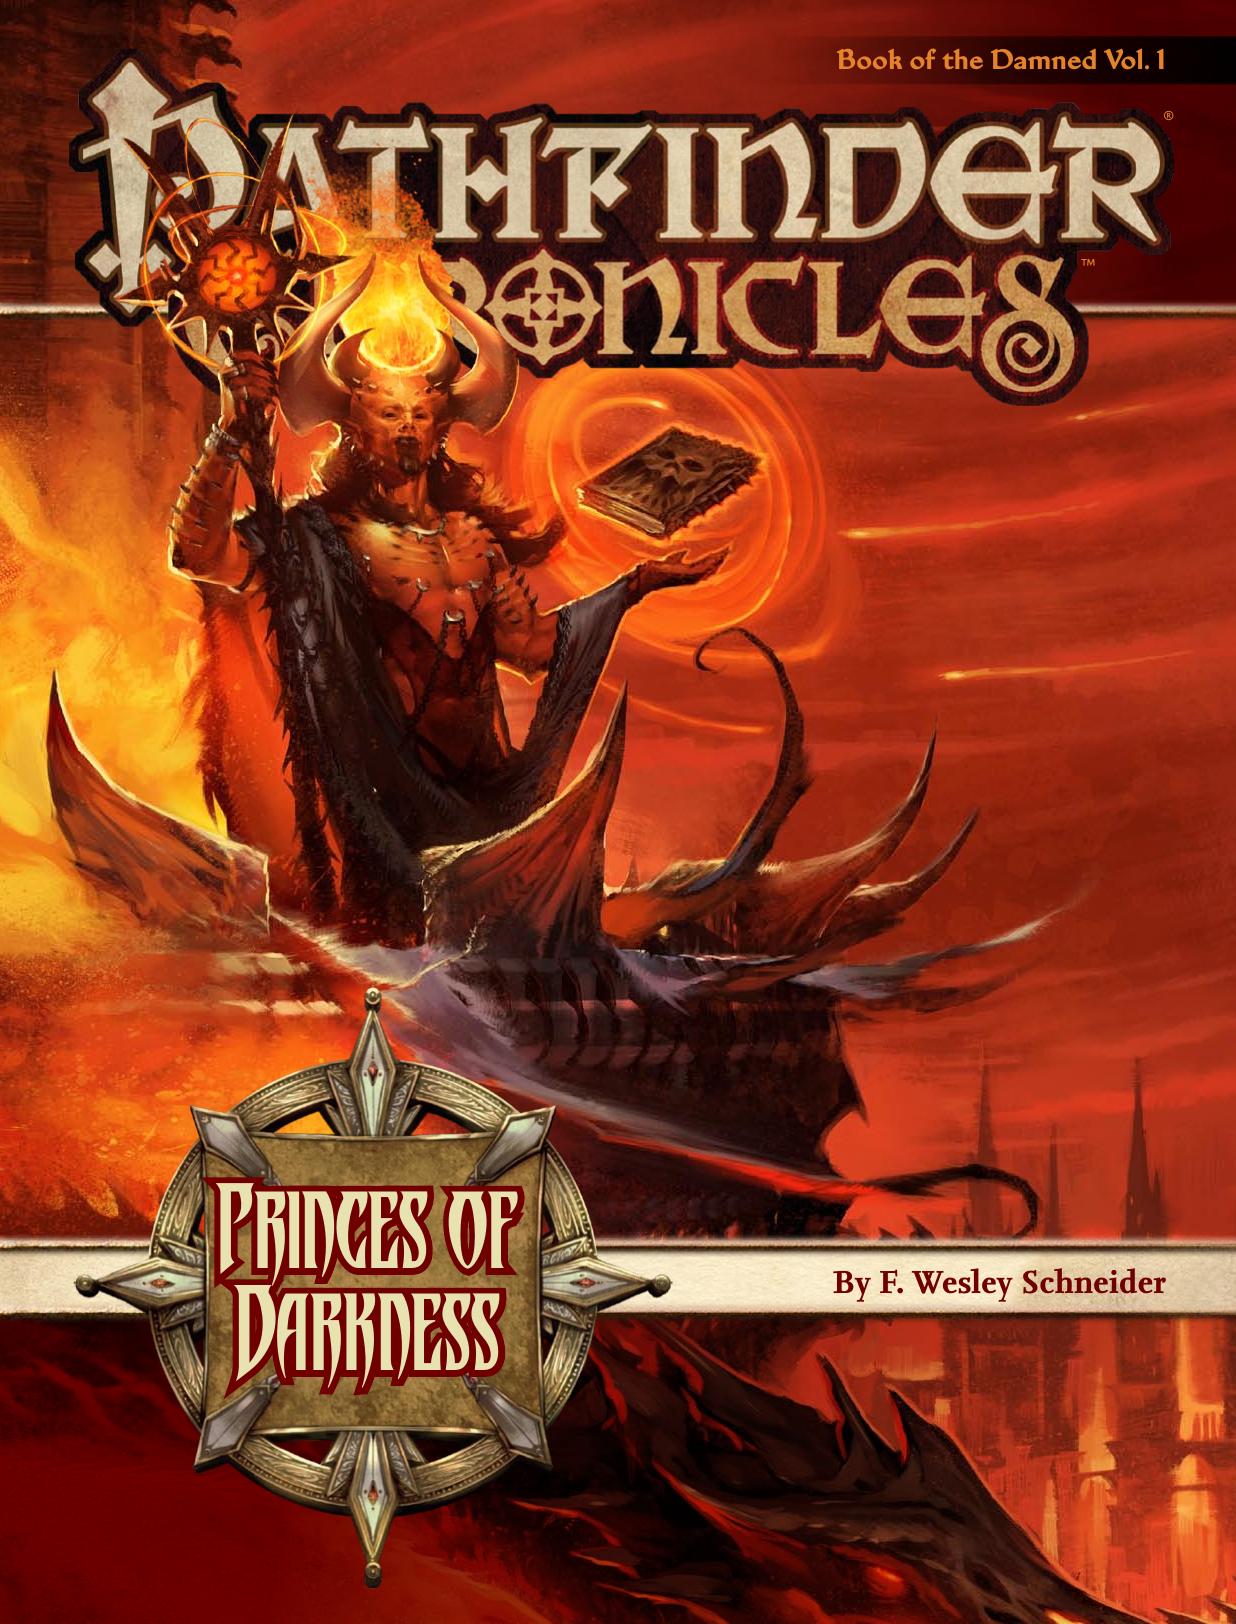 Pathfinder Chronicles: Book of the Damned Volume 1, Princes of Darkness